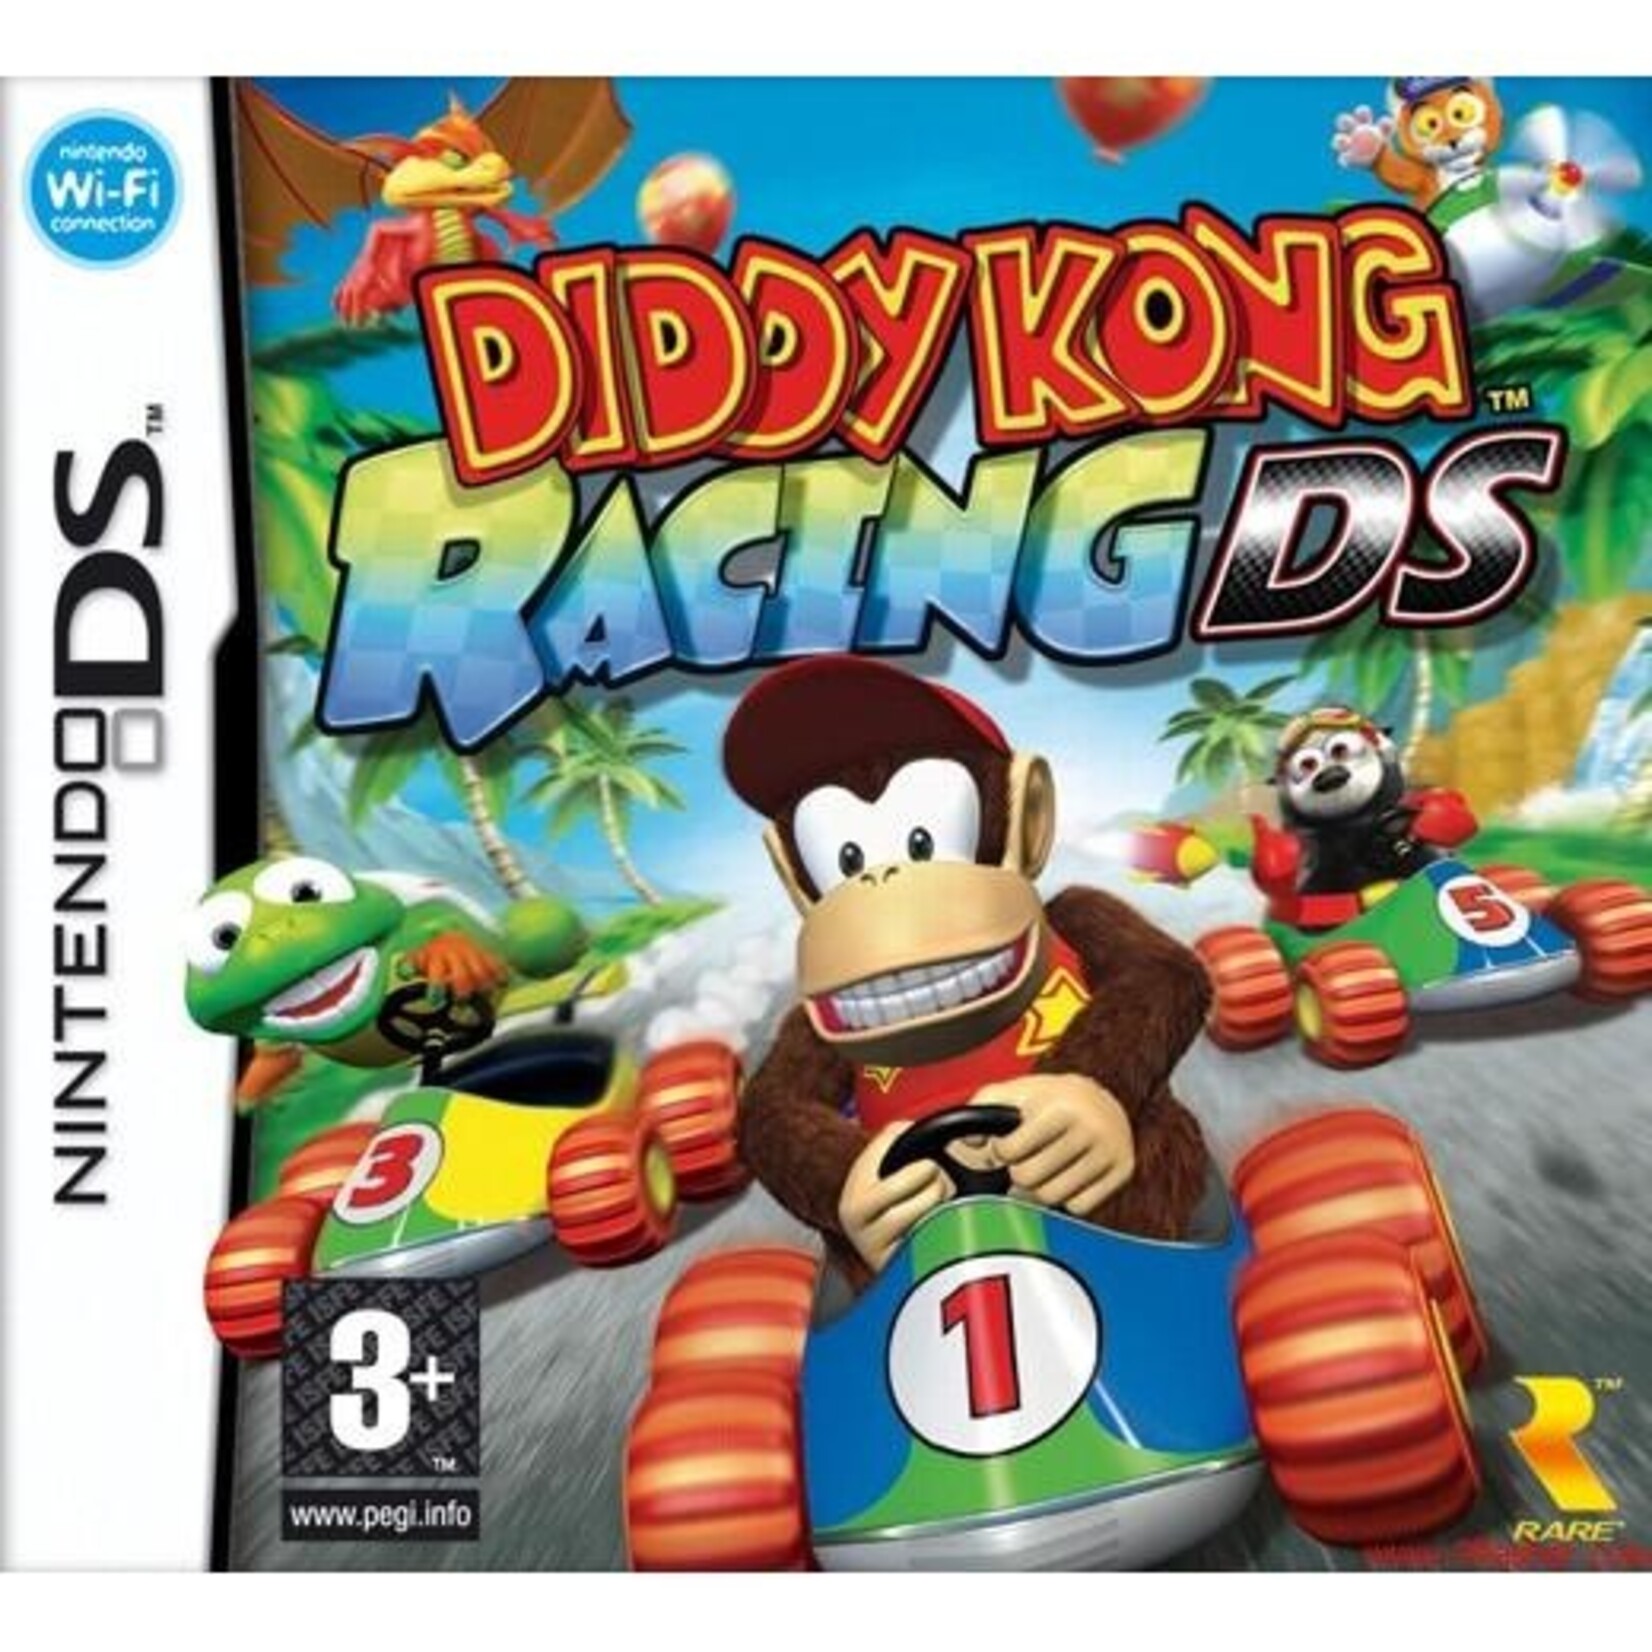 Diddy kong racing ds